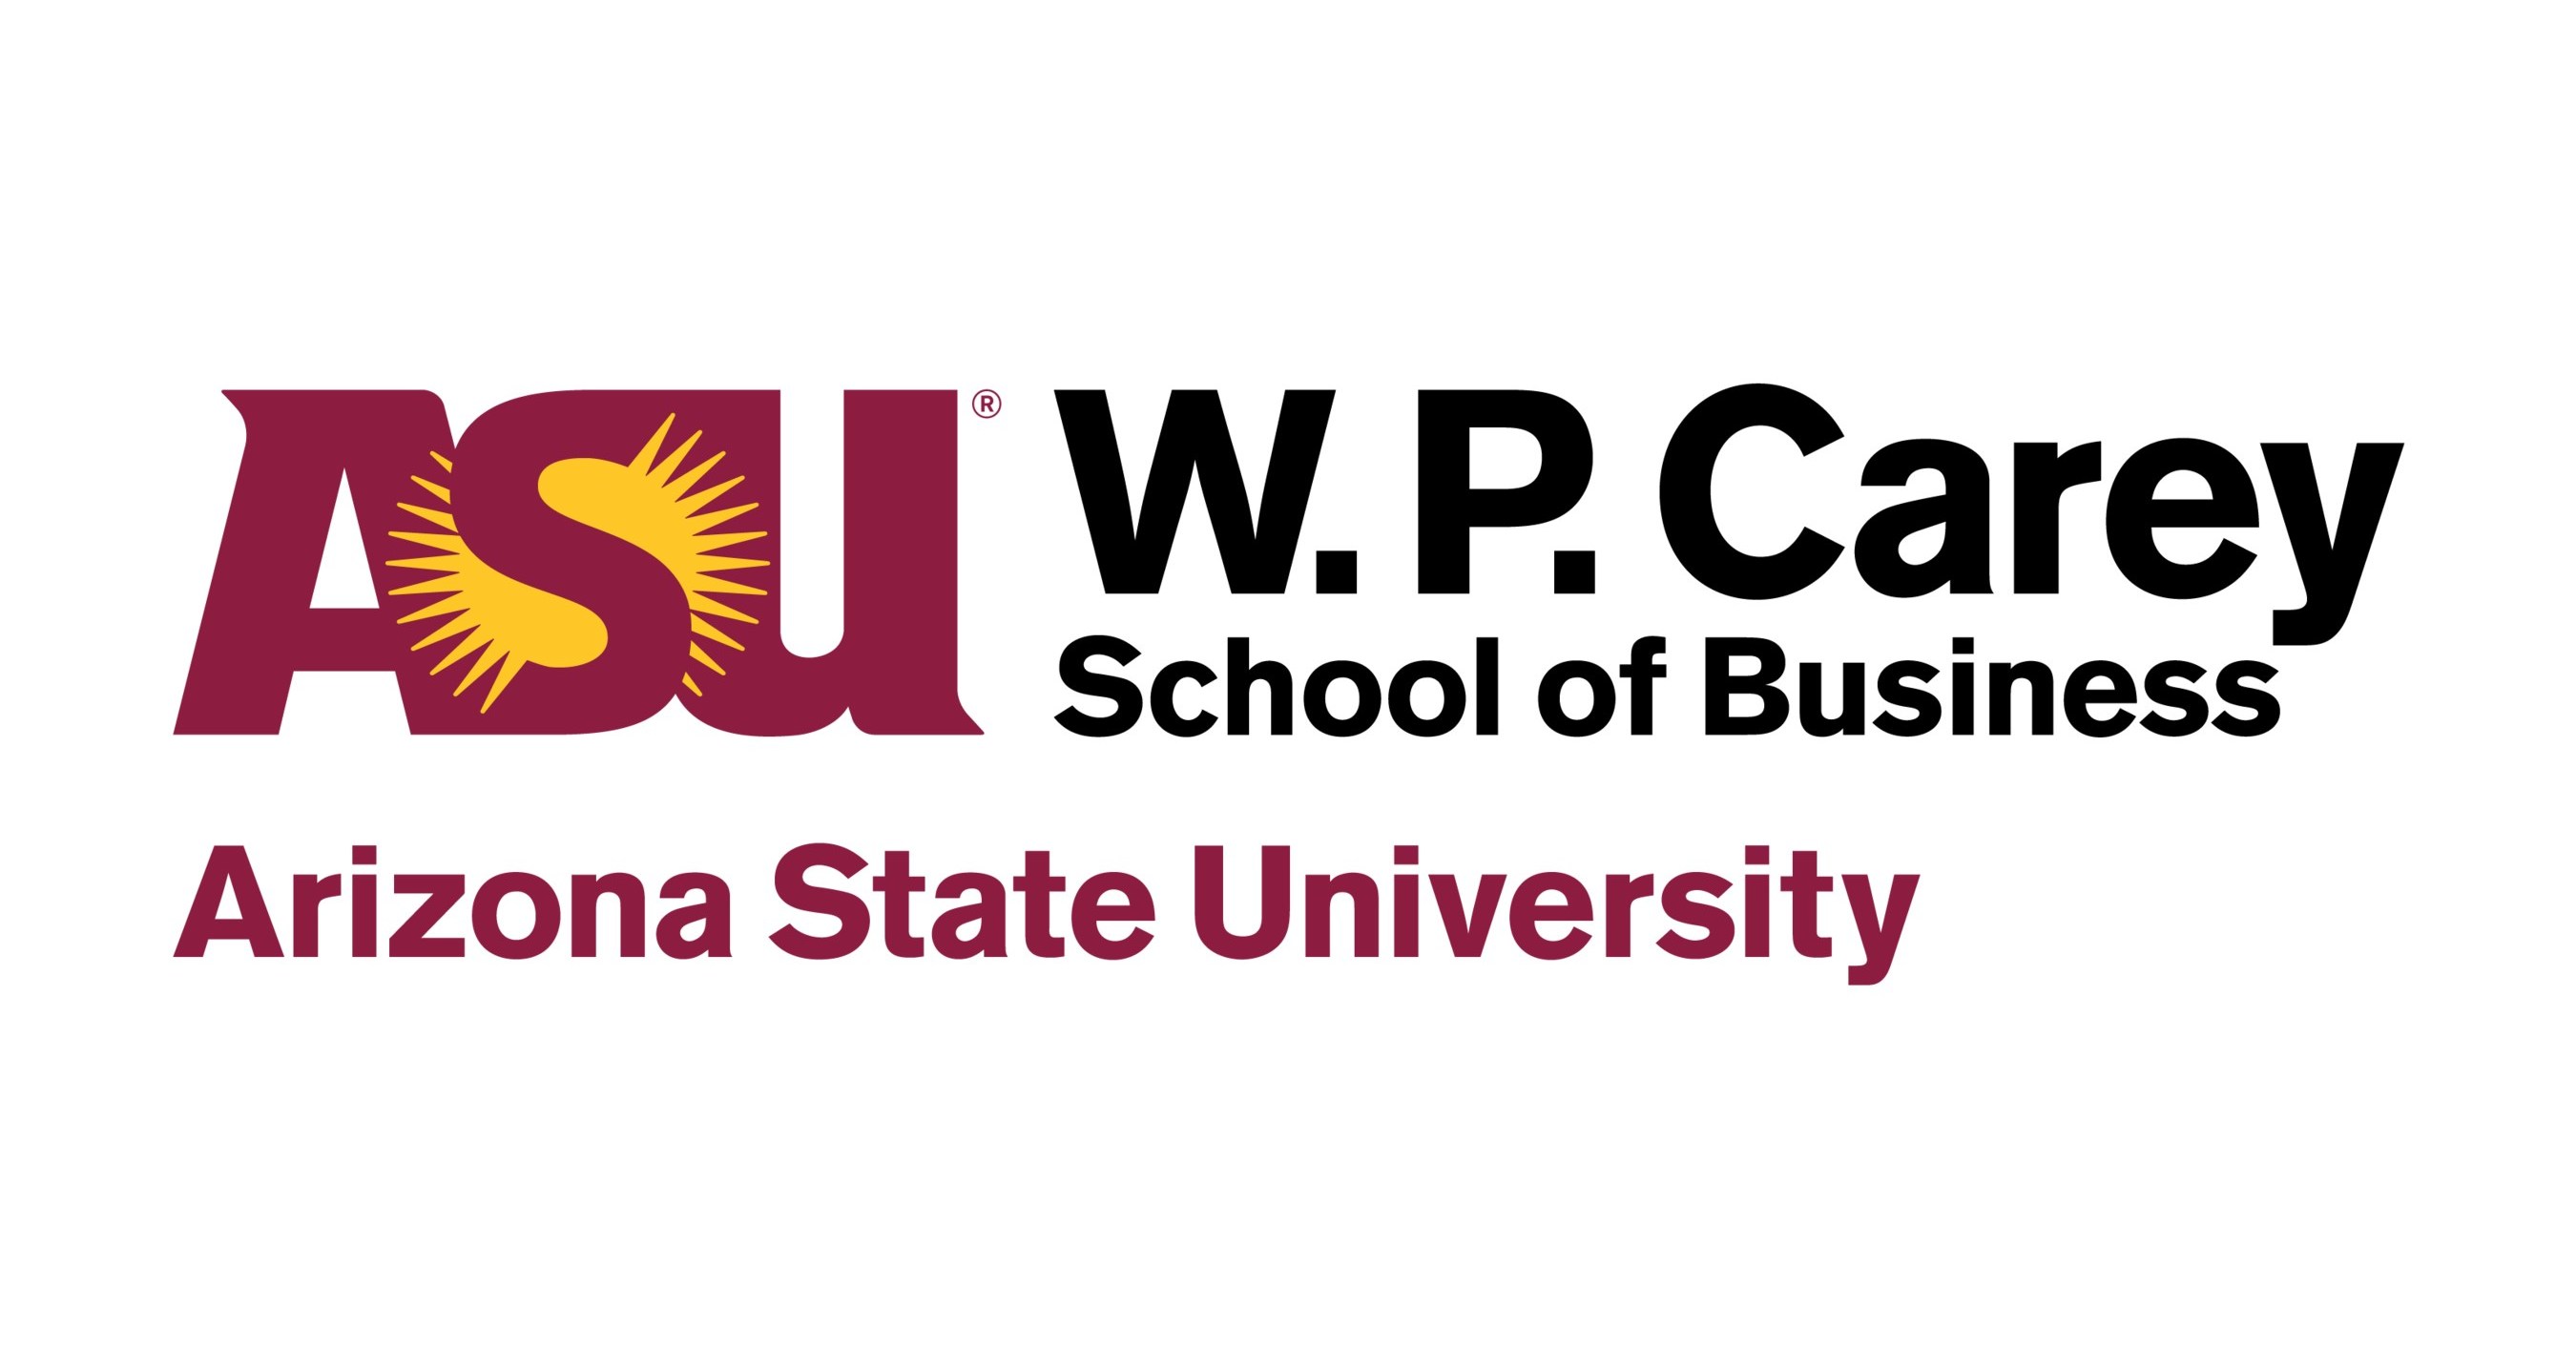 The W. P. Carey School of Business 10 new faculty members at